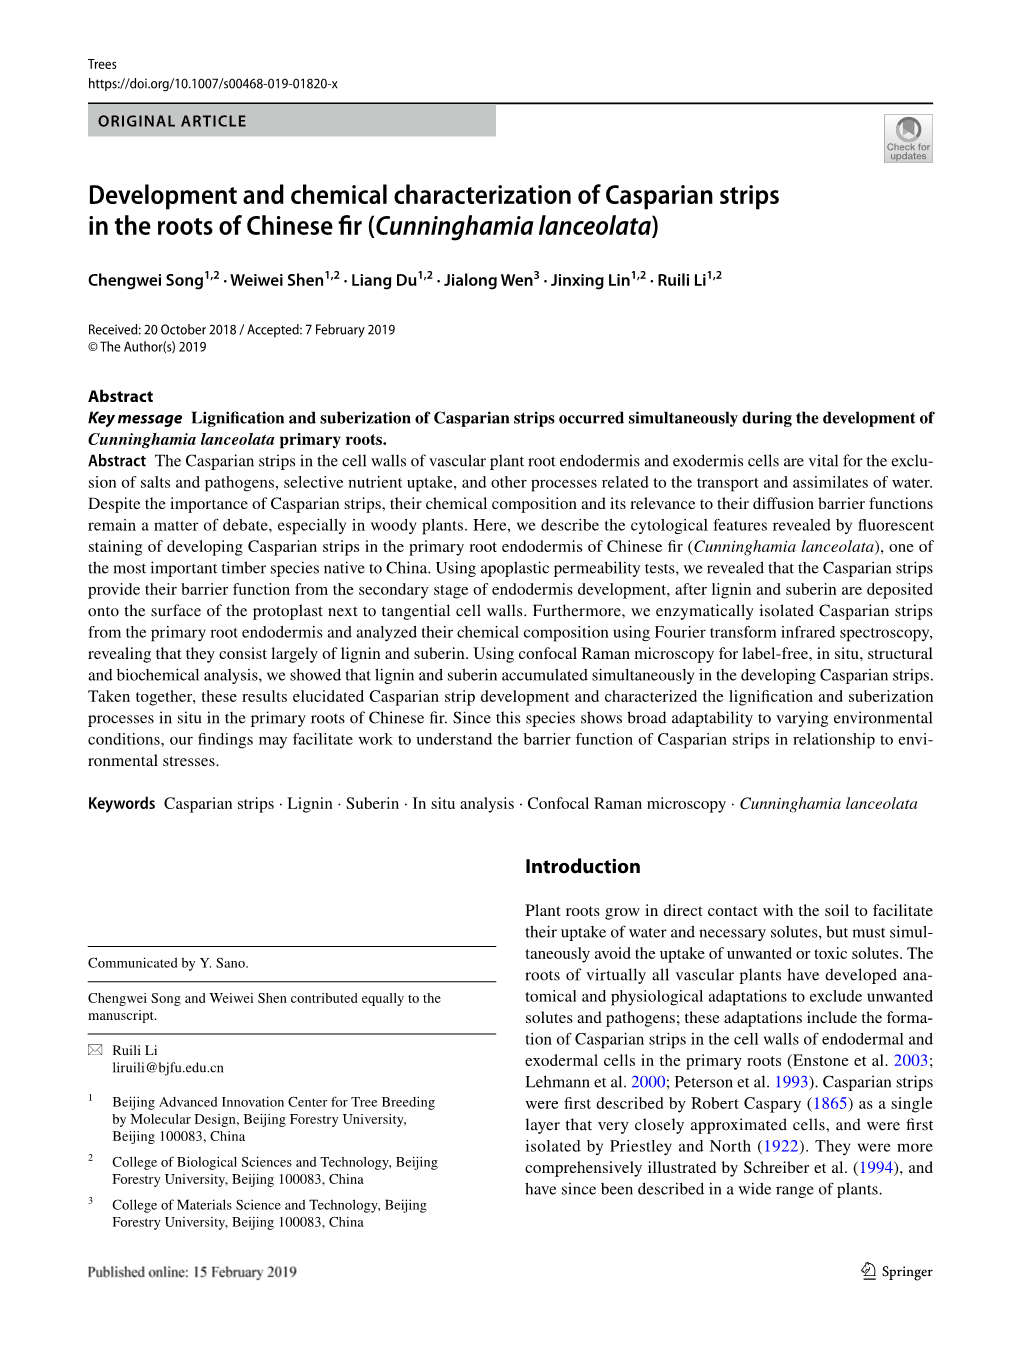 Development and Chemical Characterization of Casparian Strips in the Roots of Chinese Fir (Cunninghamia Lanceolata)